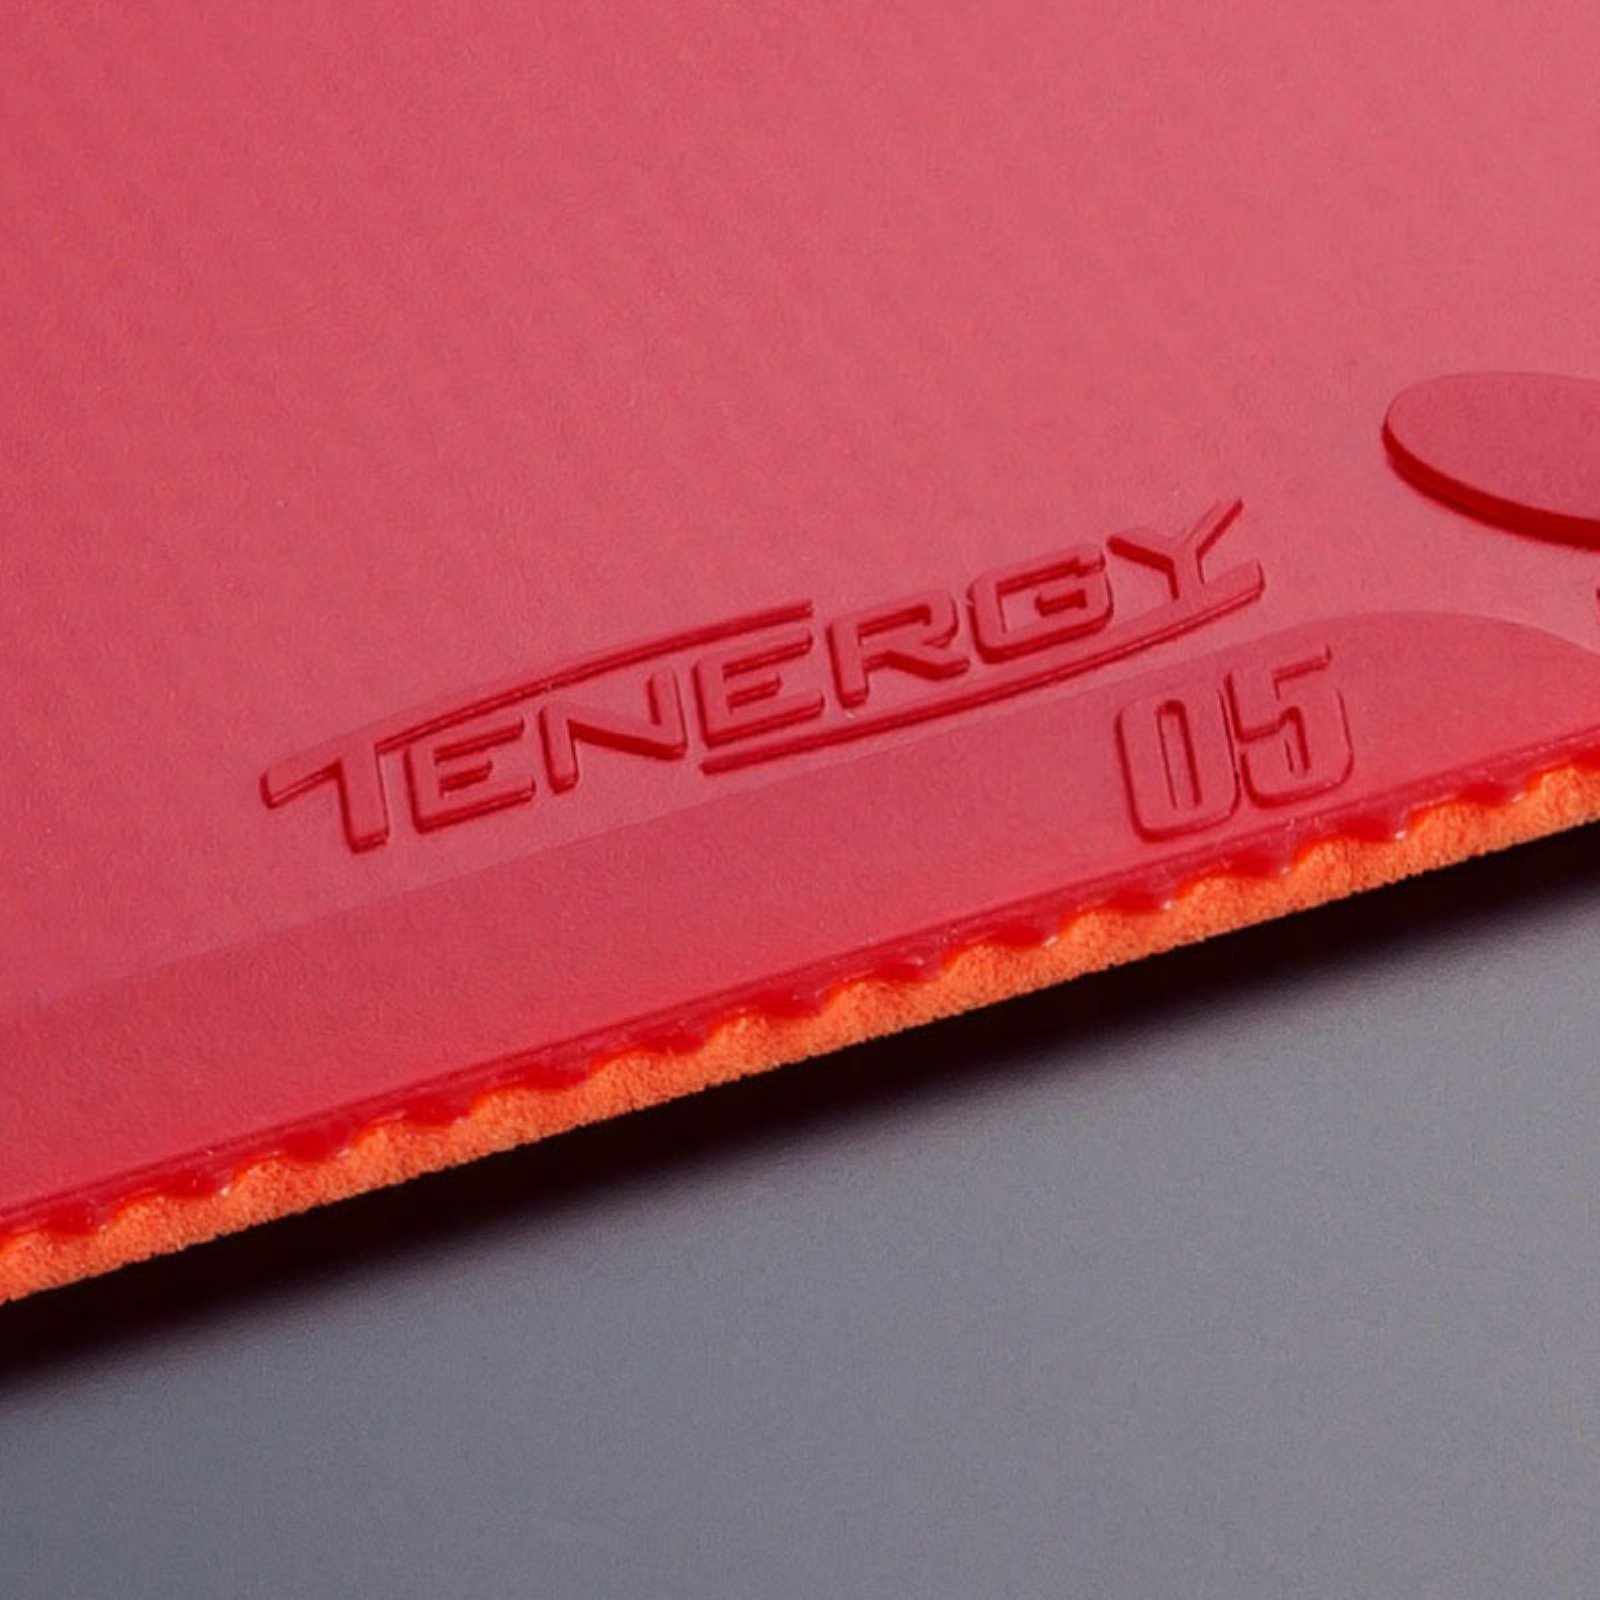 Butterfly Tenergy 05 Table Tennis Rubber, 1.9 mm, Black - image 4 of 4